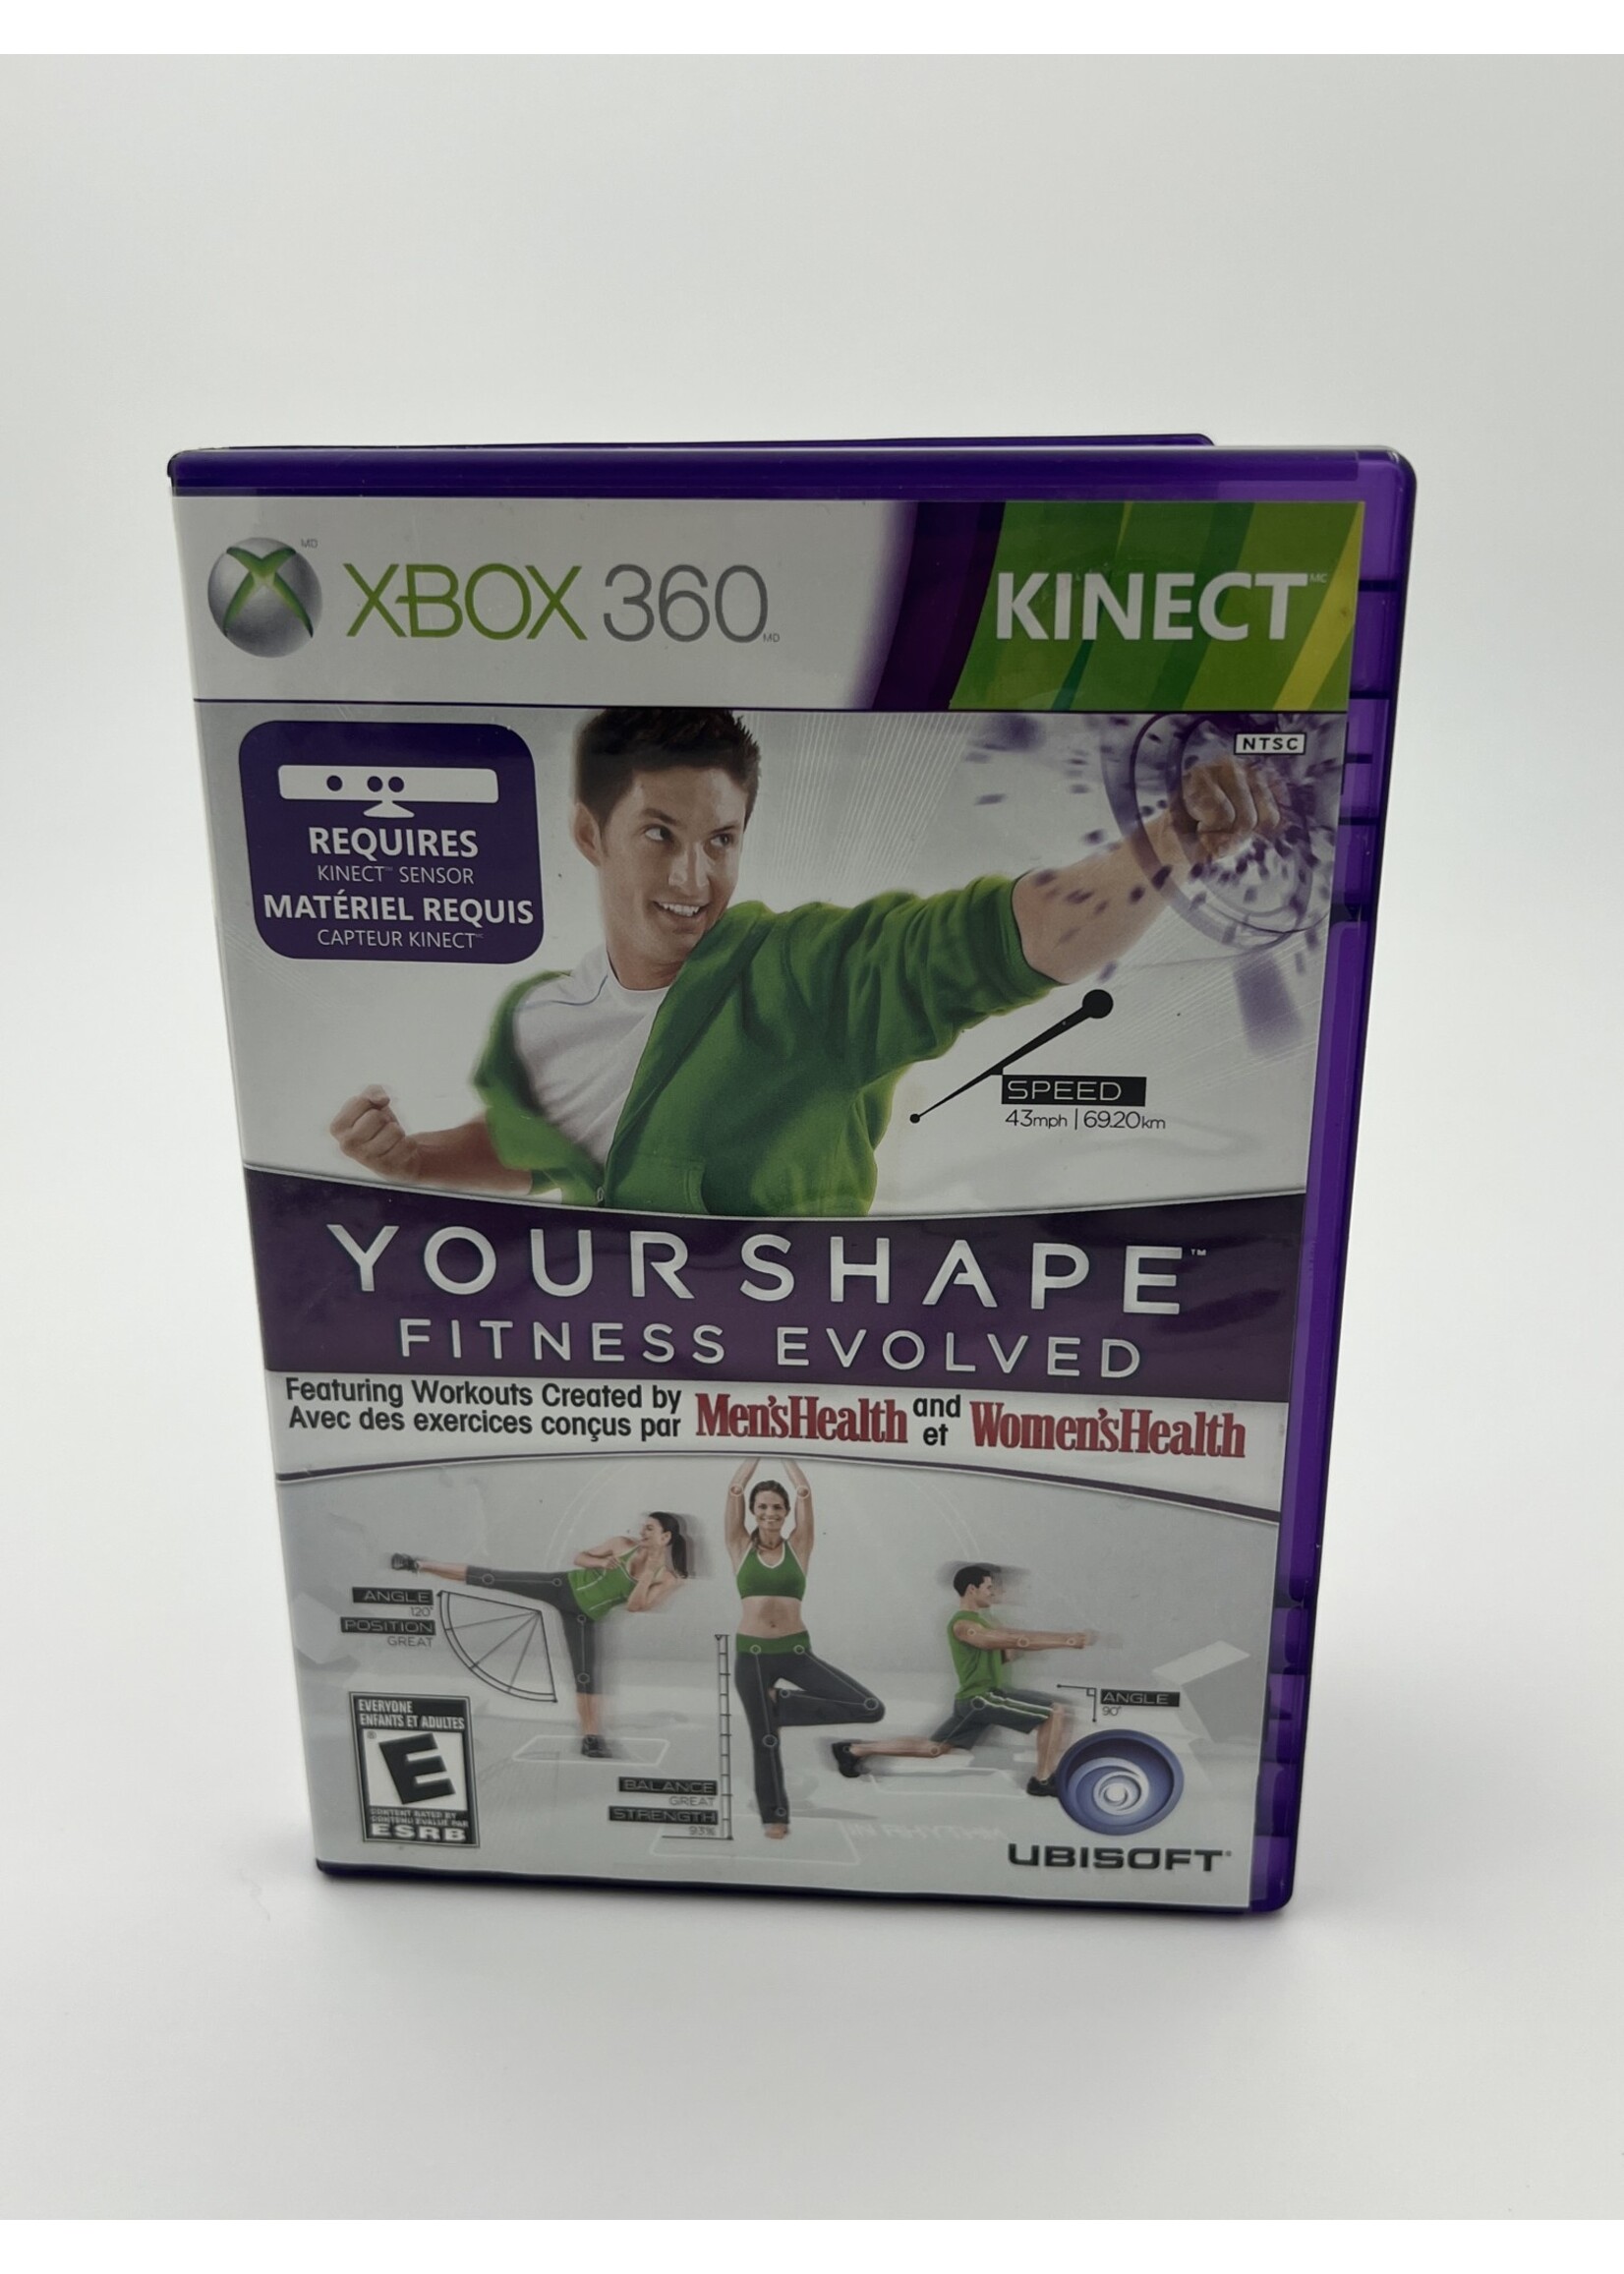 Xbox 360 Kinect Your Shape Fitness Evolved 2012 Complete Fitness Video Game  8888527046